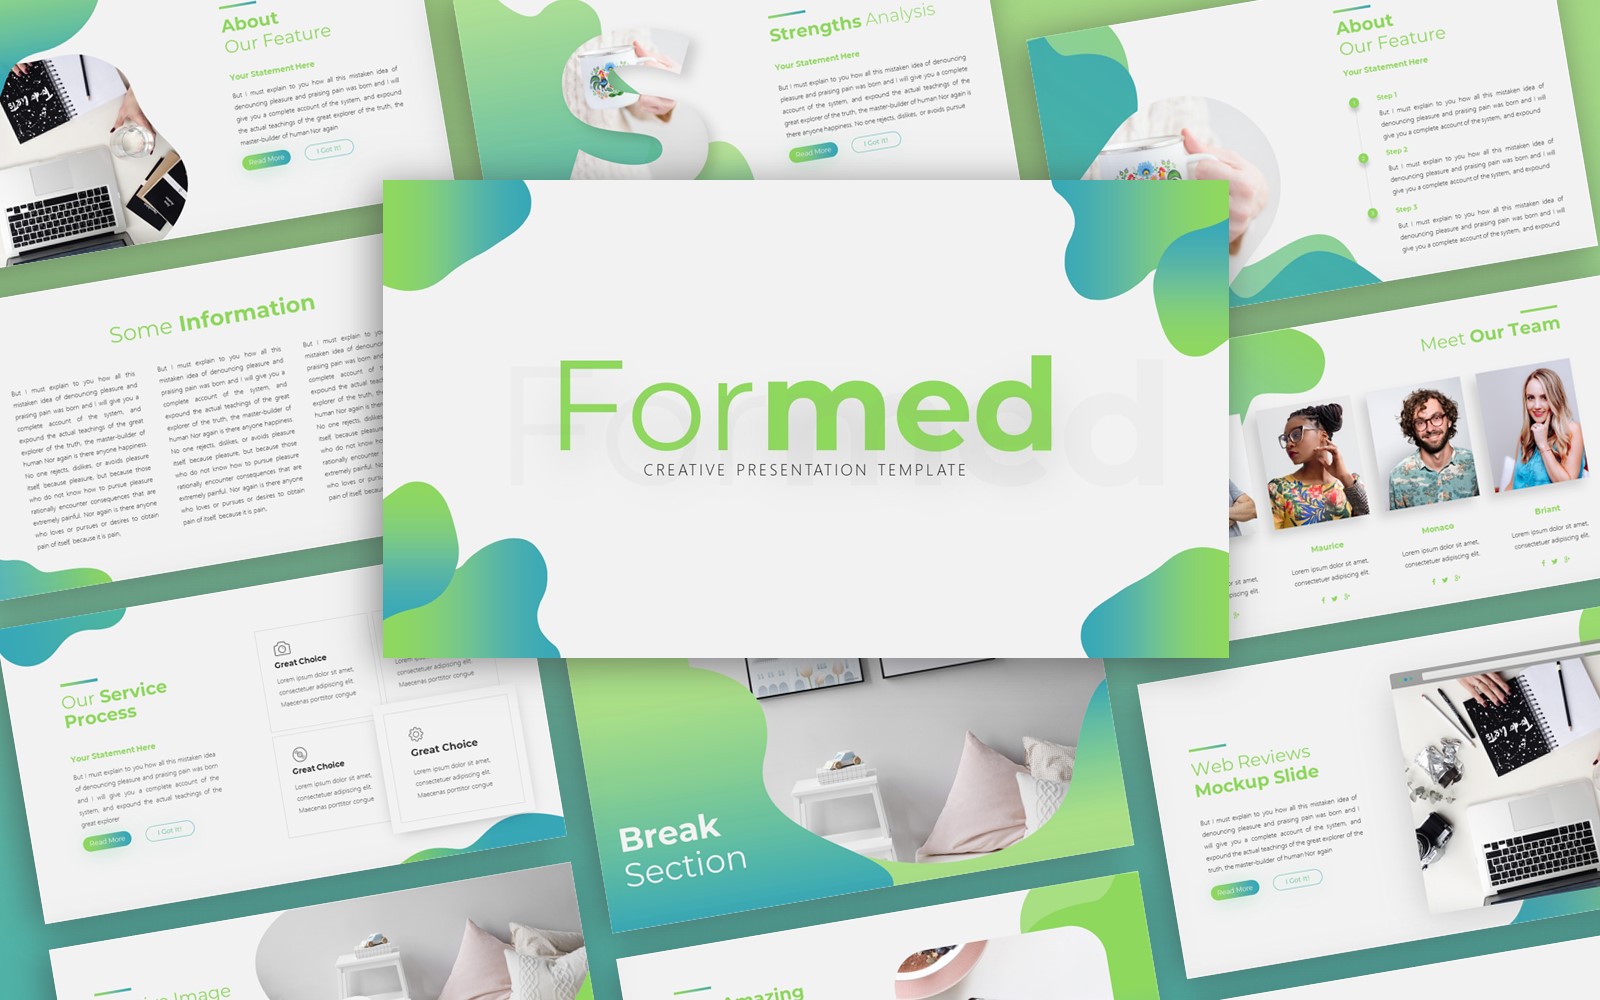 Formed Creative Presentation PowerPoint template